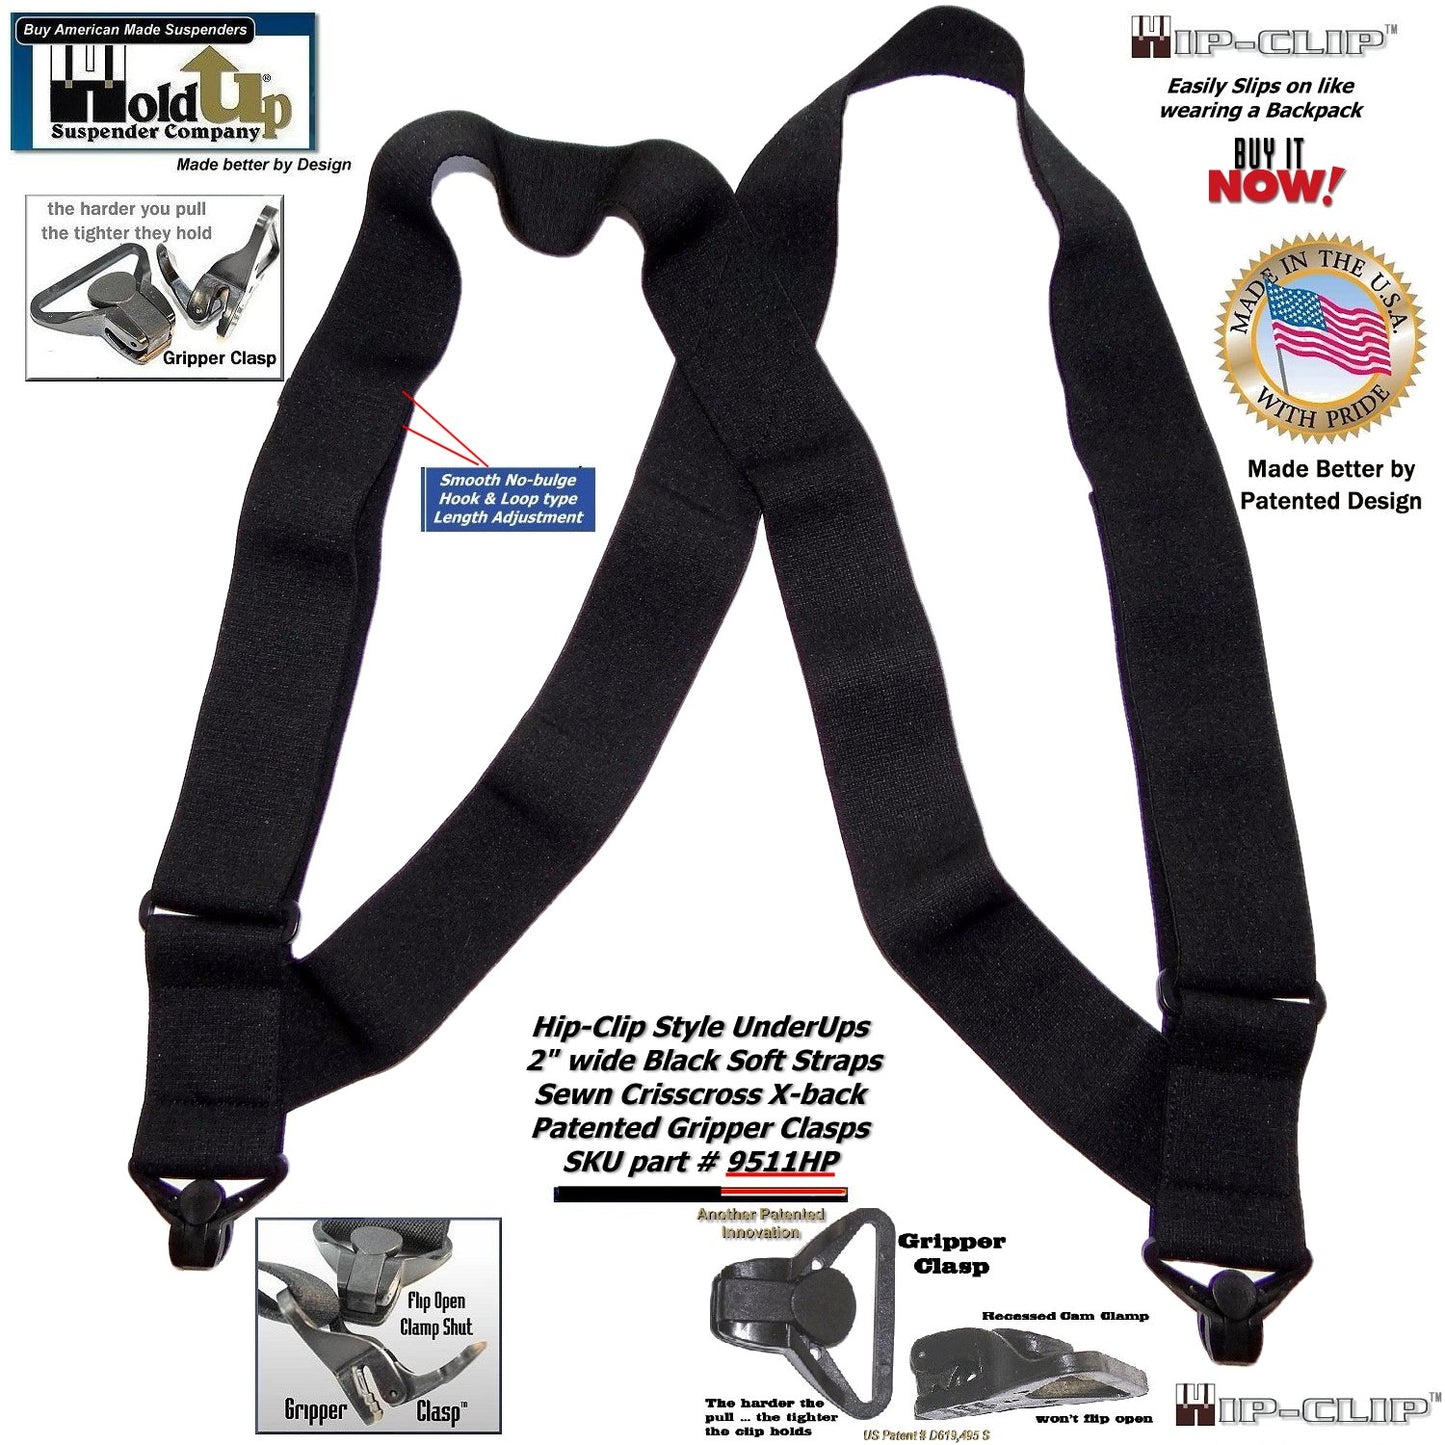 HoldUps Brand Black 2" Wide Under-Up Series Super Soft Suspenders with Patented Jumbo Black Gripper Clasp